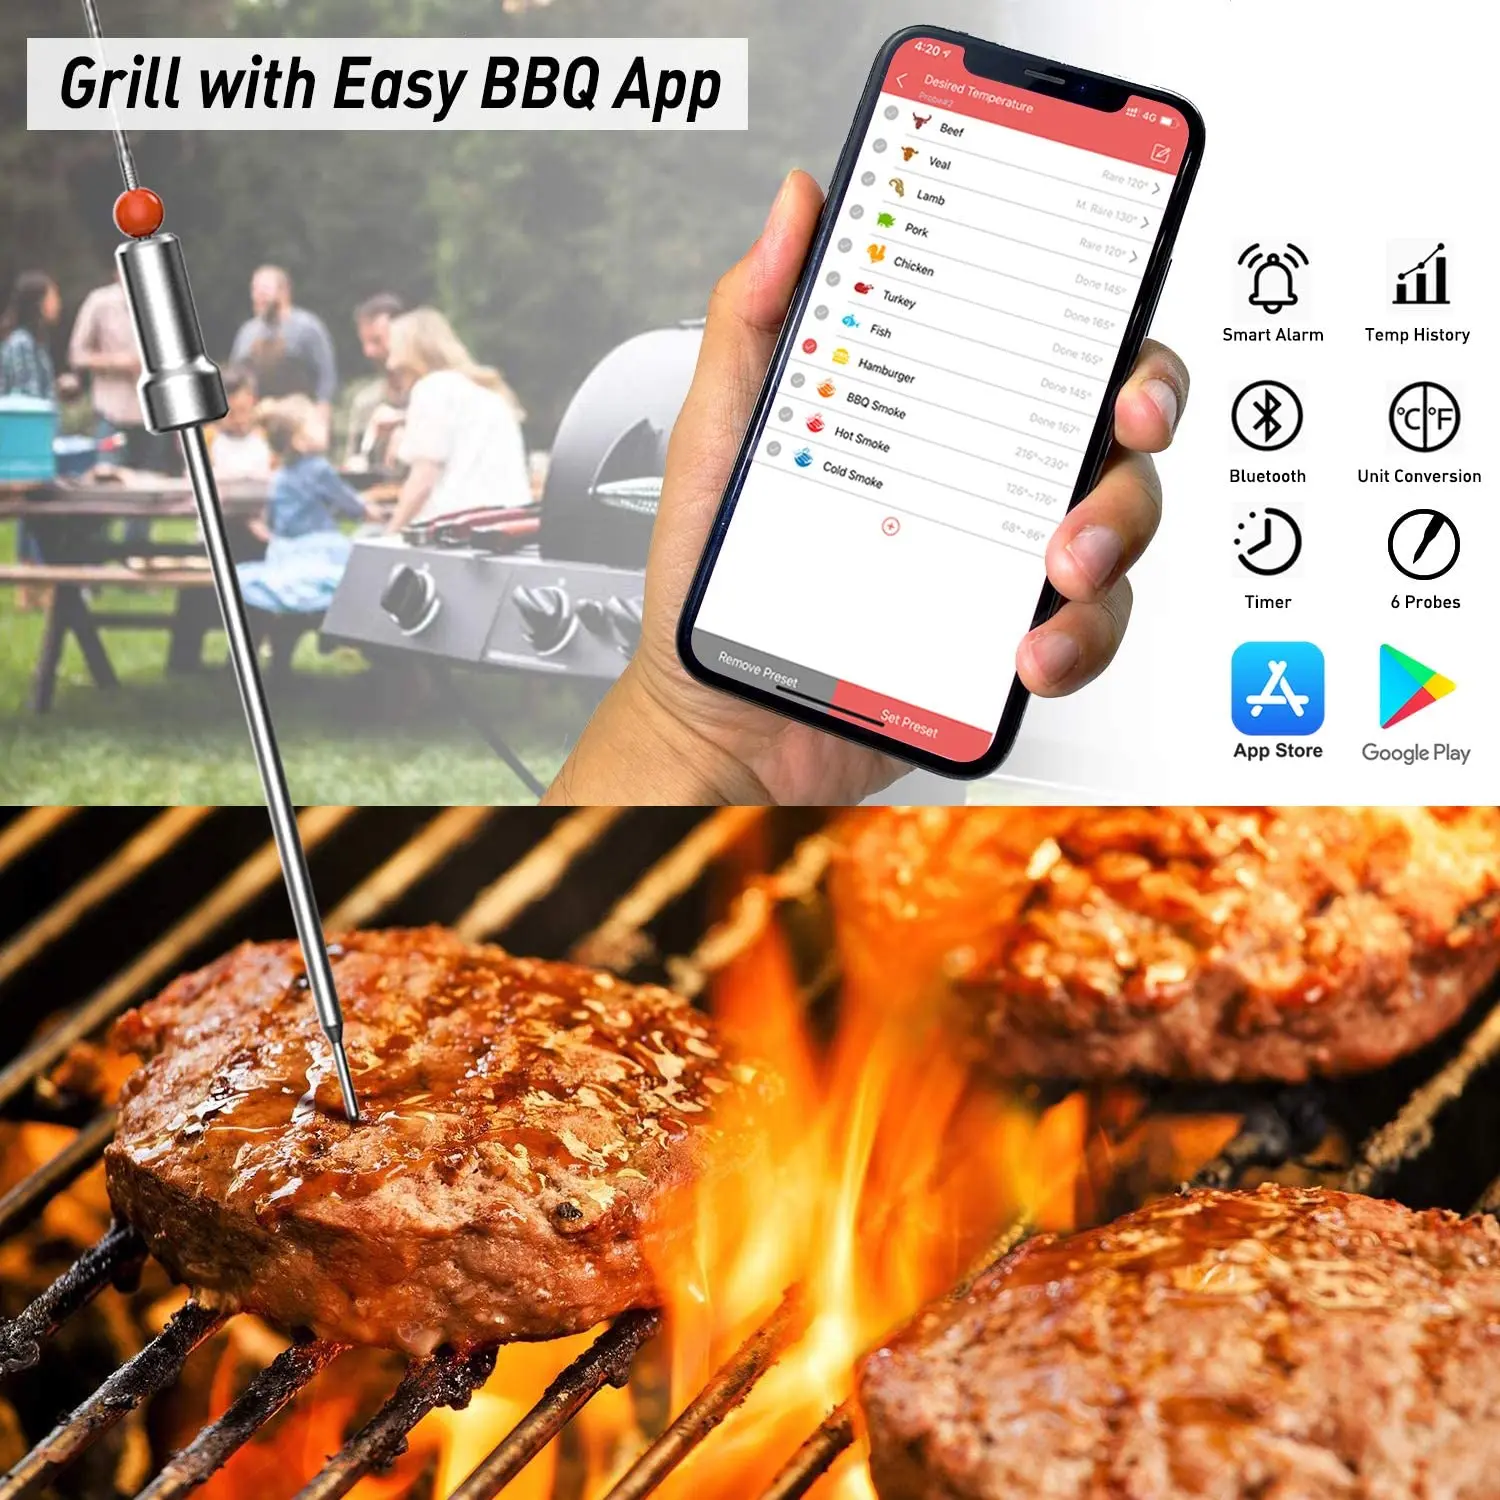 Tenergy Solis Digital Meat Thermometer, App Controlled Wireless Bluetooth Smart BBQ Thermometer with 6 Stainless Steel Probes